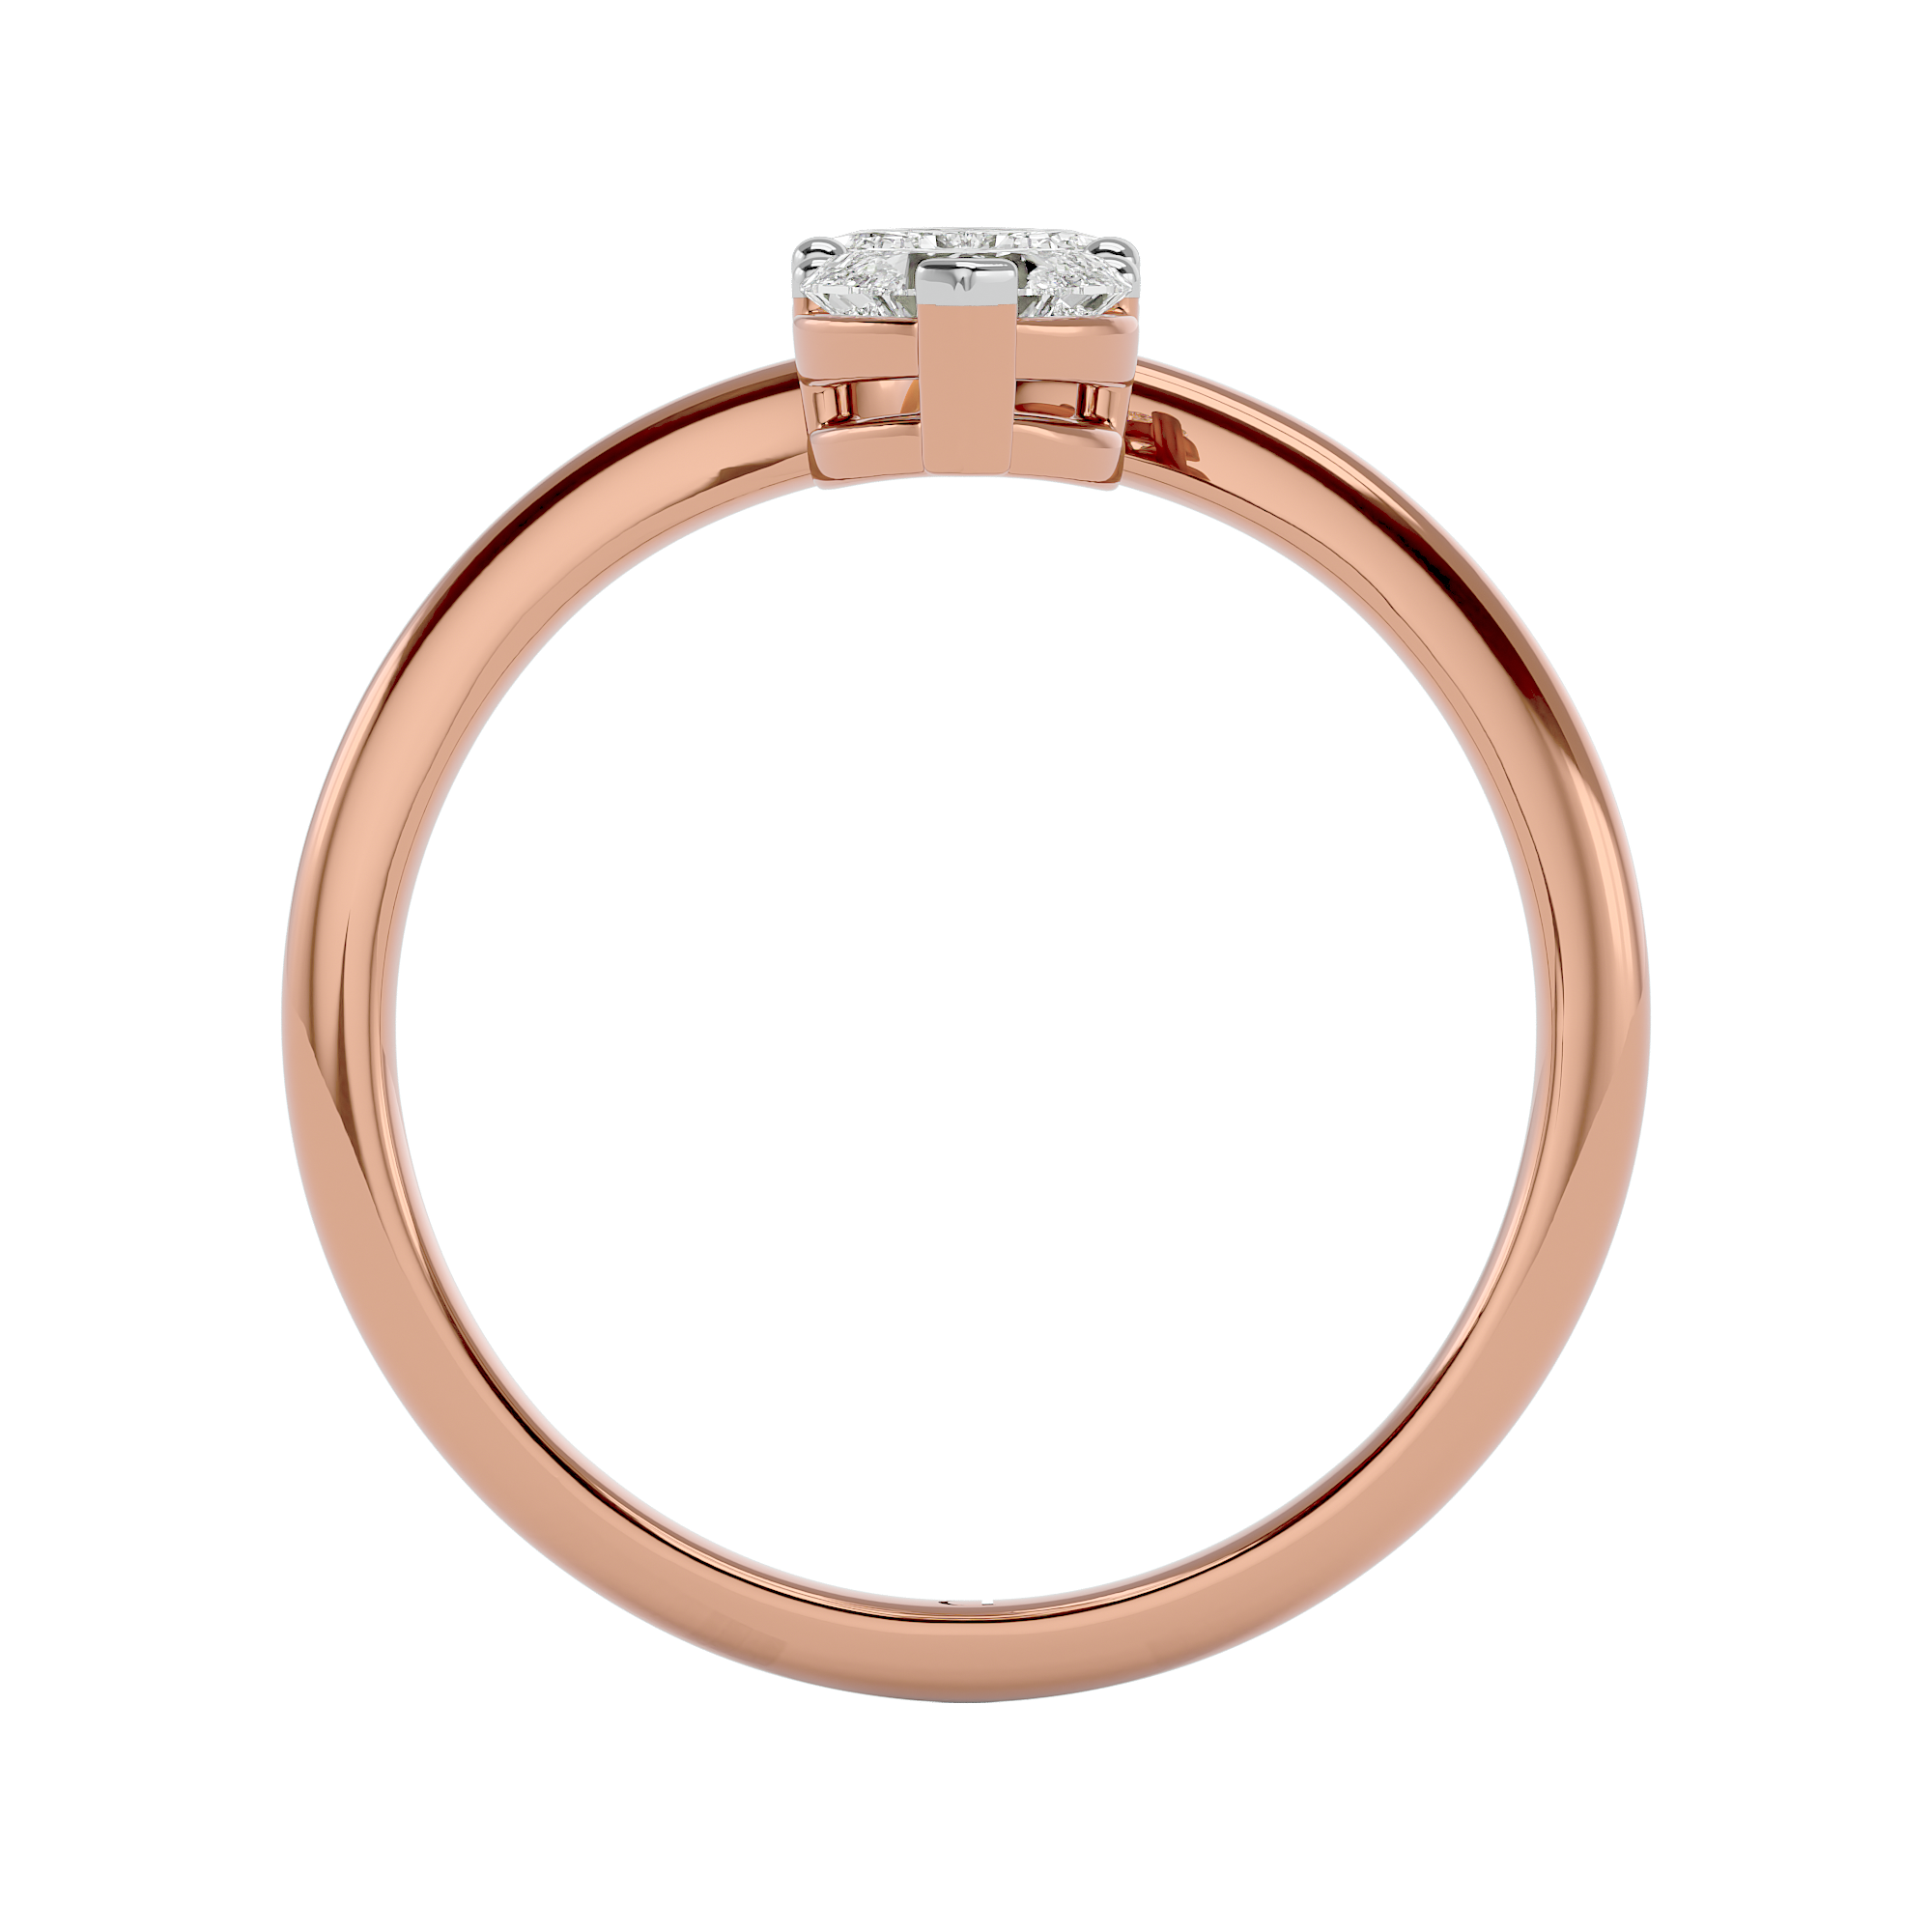  0.66Ct Heart Shaped Promise Ring in 14Kt Rose Gold - Blu Diamonds